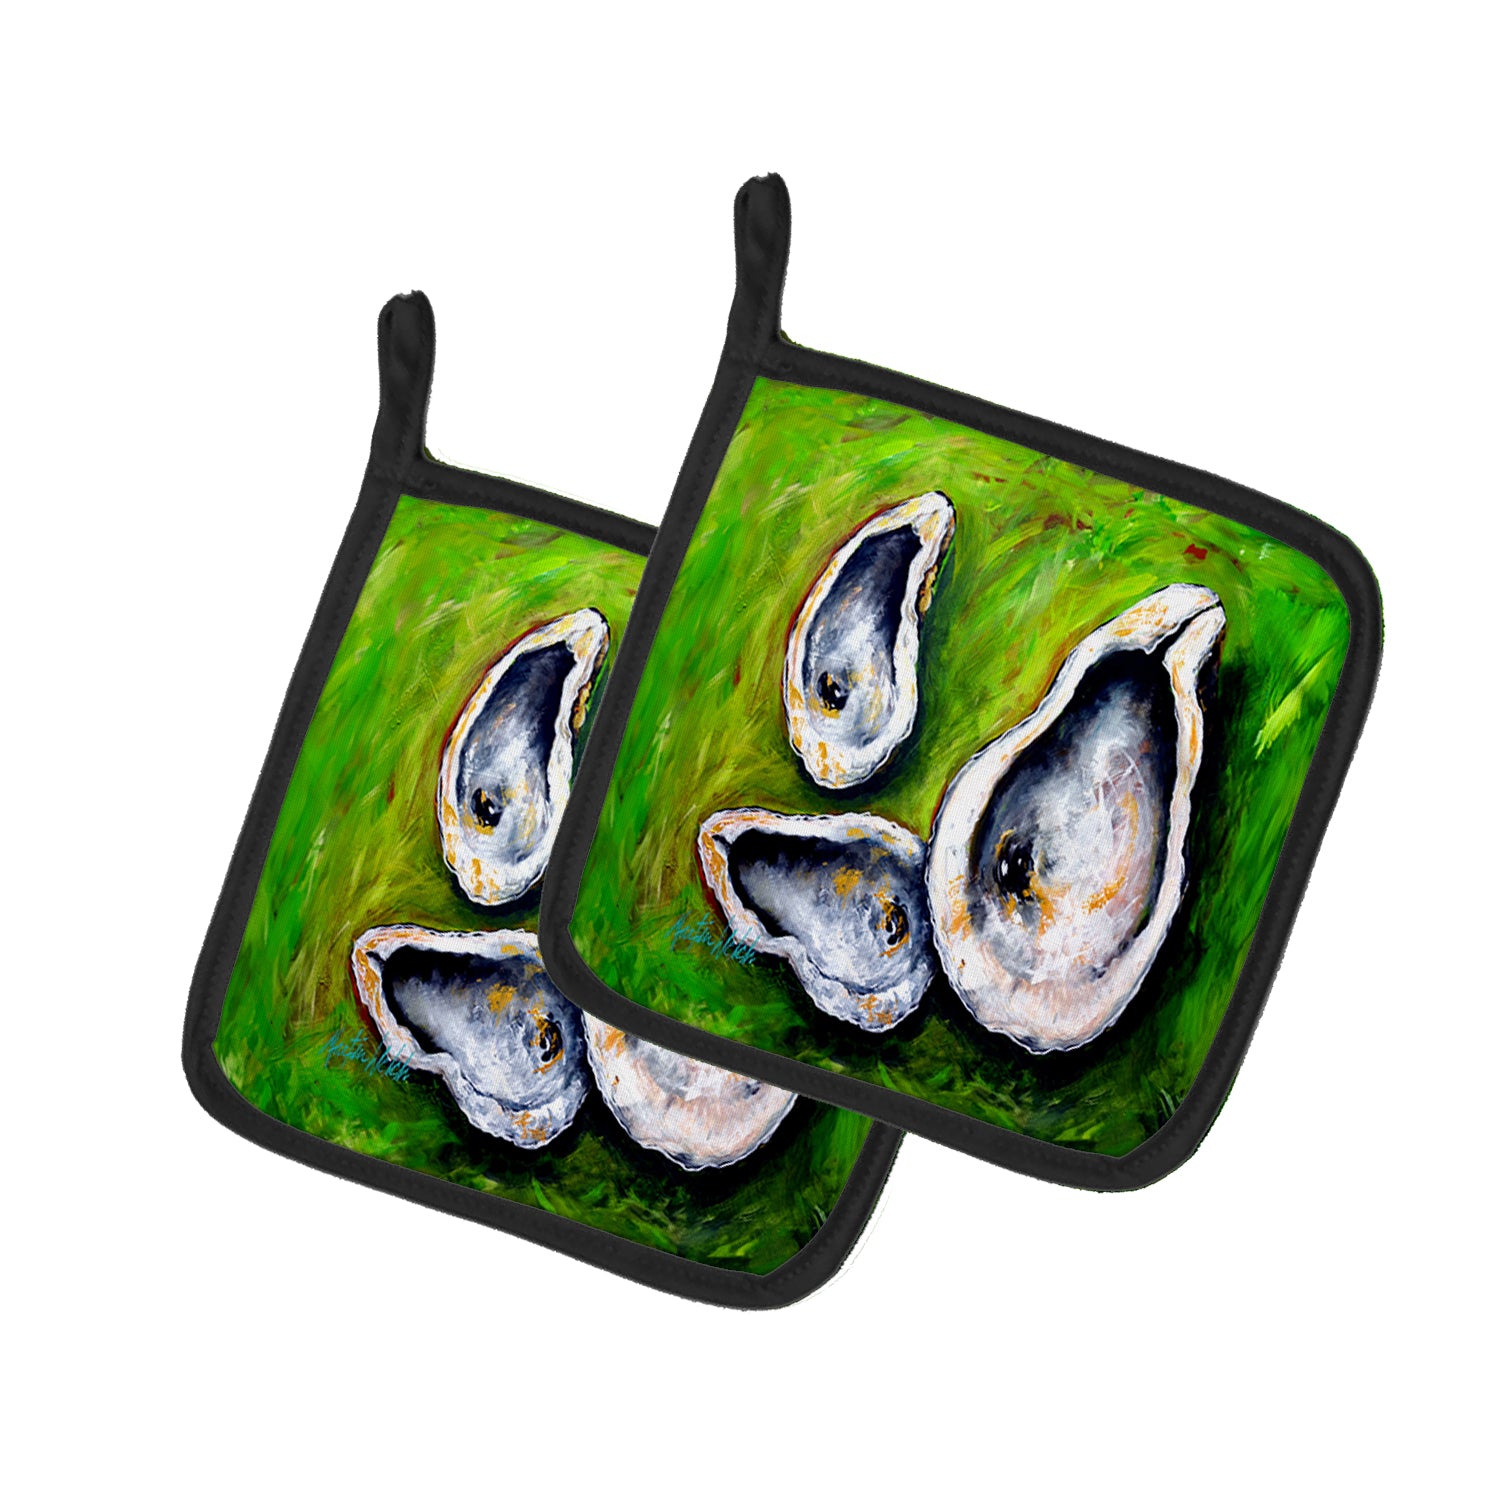 Buy this All Shucked Oysters Pair of Pot Holders